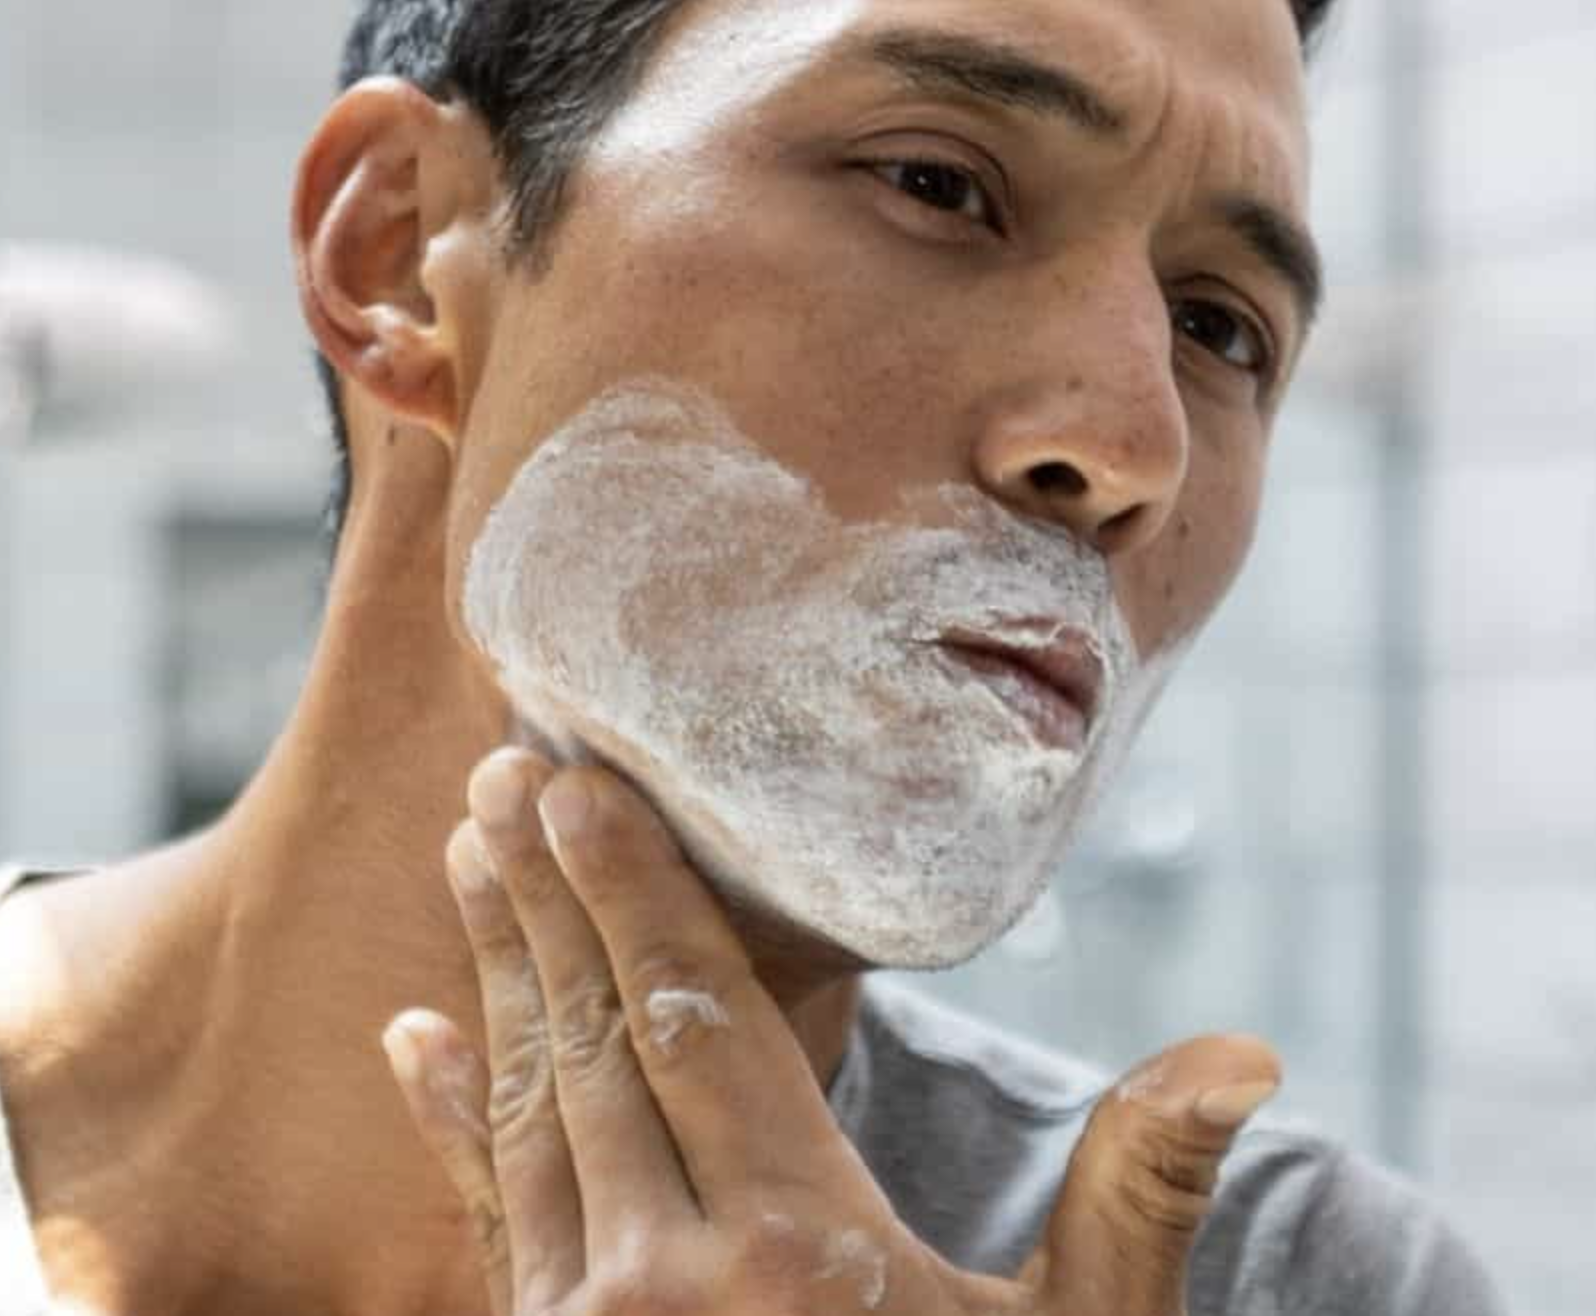 “To me, shaving cream has always seemed underpriced. I pay like $5 and a can lasts me years. I do use it sparingly but compared to other hygiene products, It seems dirt cheap.” —MONSTERBEARMAN